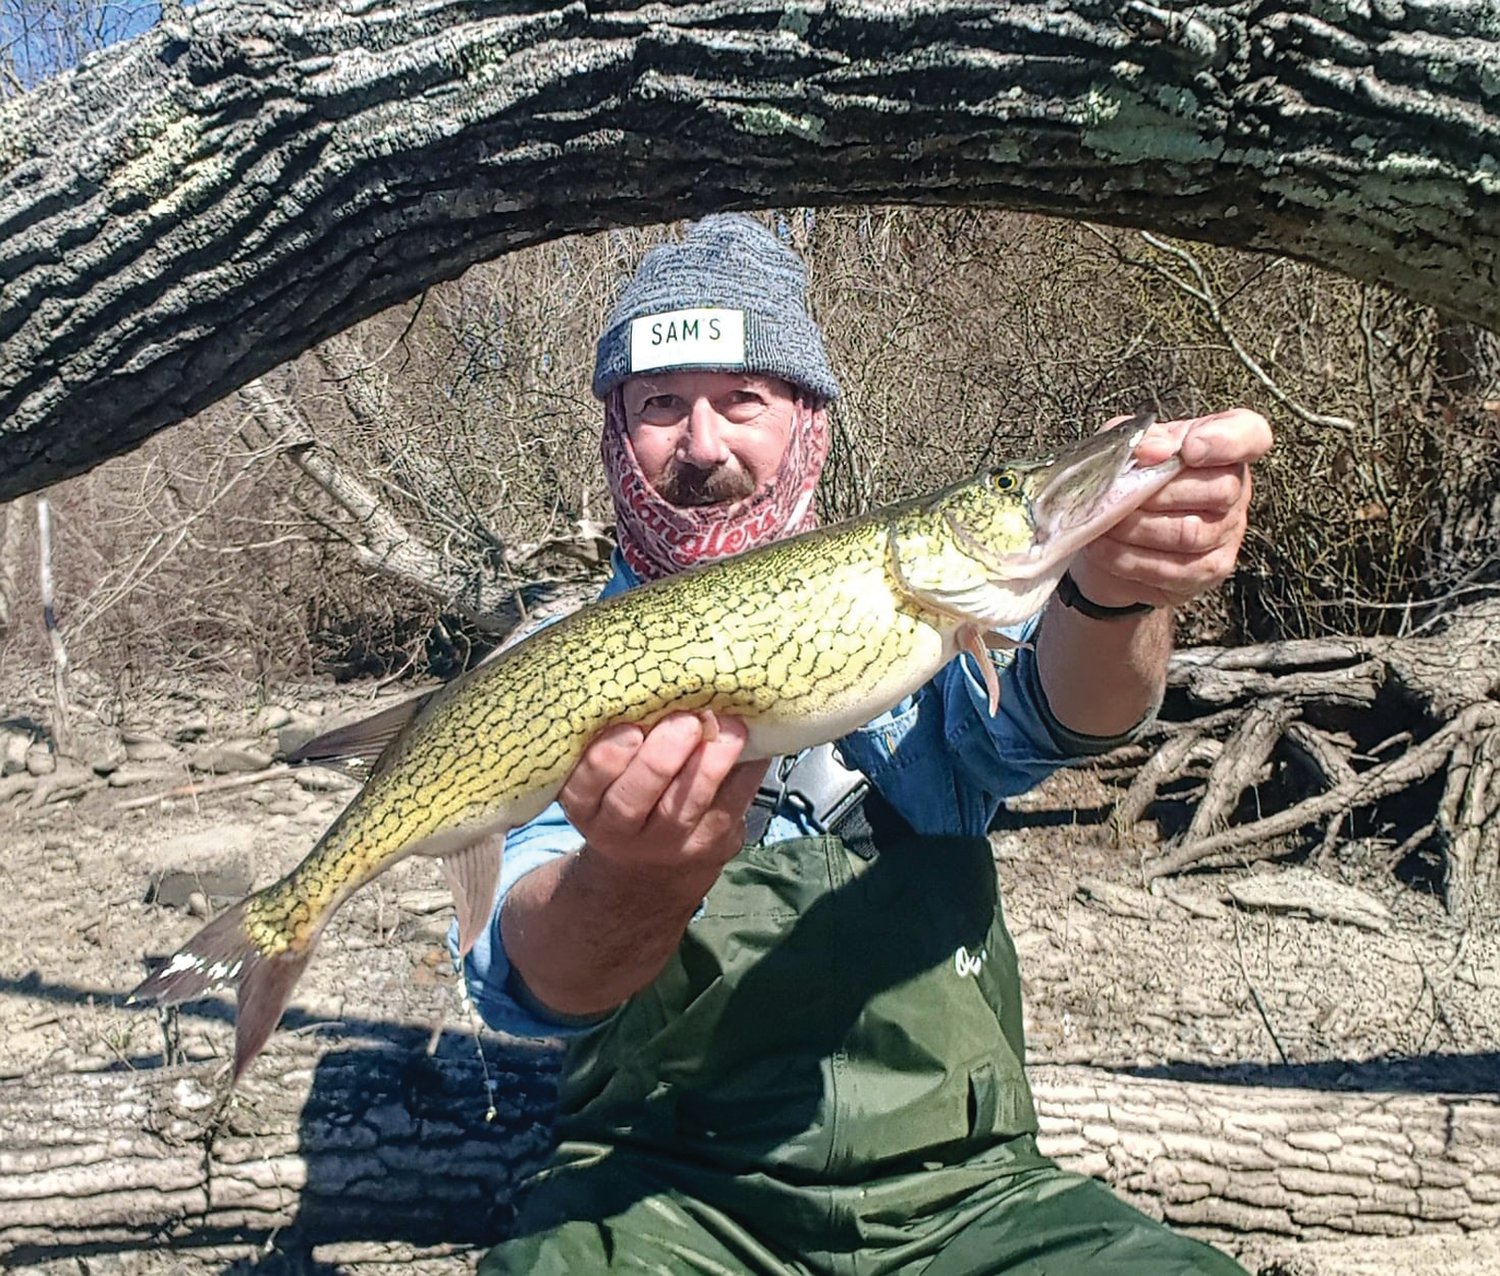 PICKEREL: John Migliori with a 25.5-inch pickerel he caught on Aquidneck Island last week. (Submitted photo)